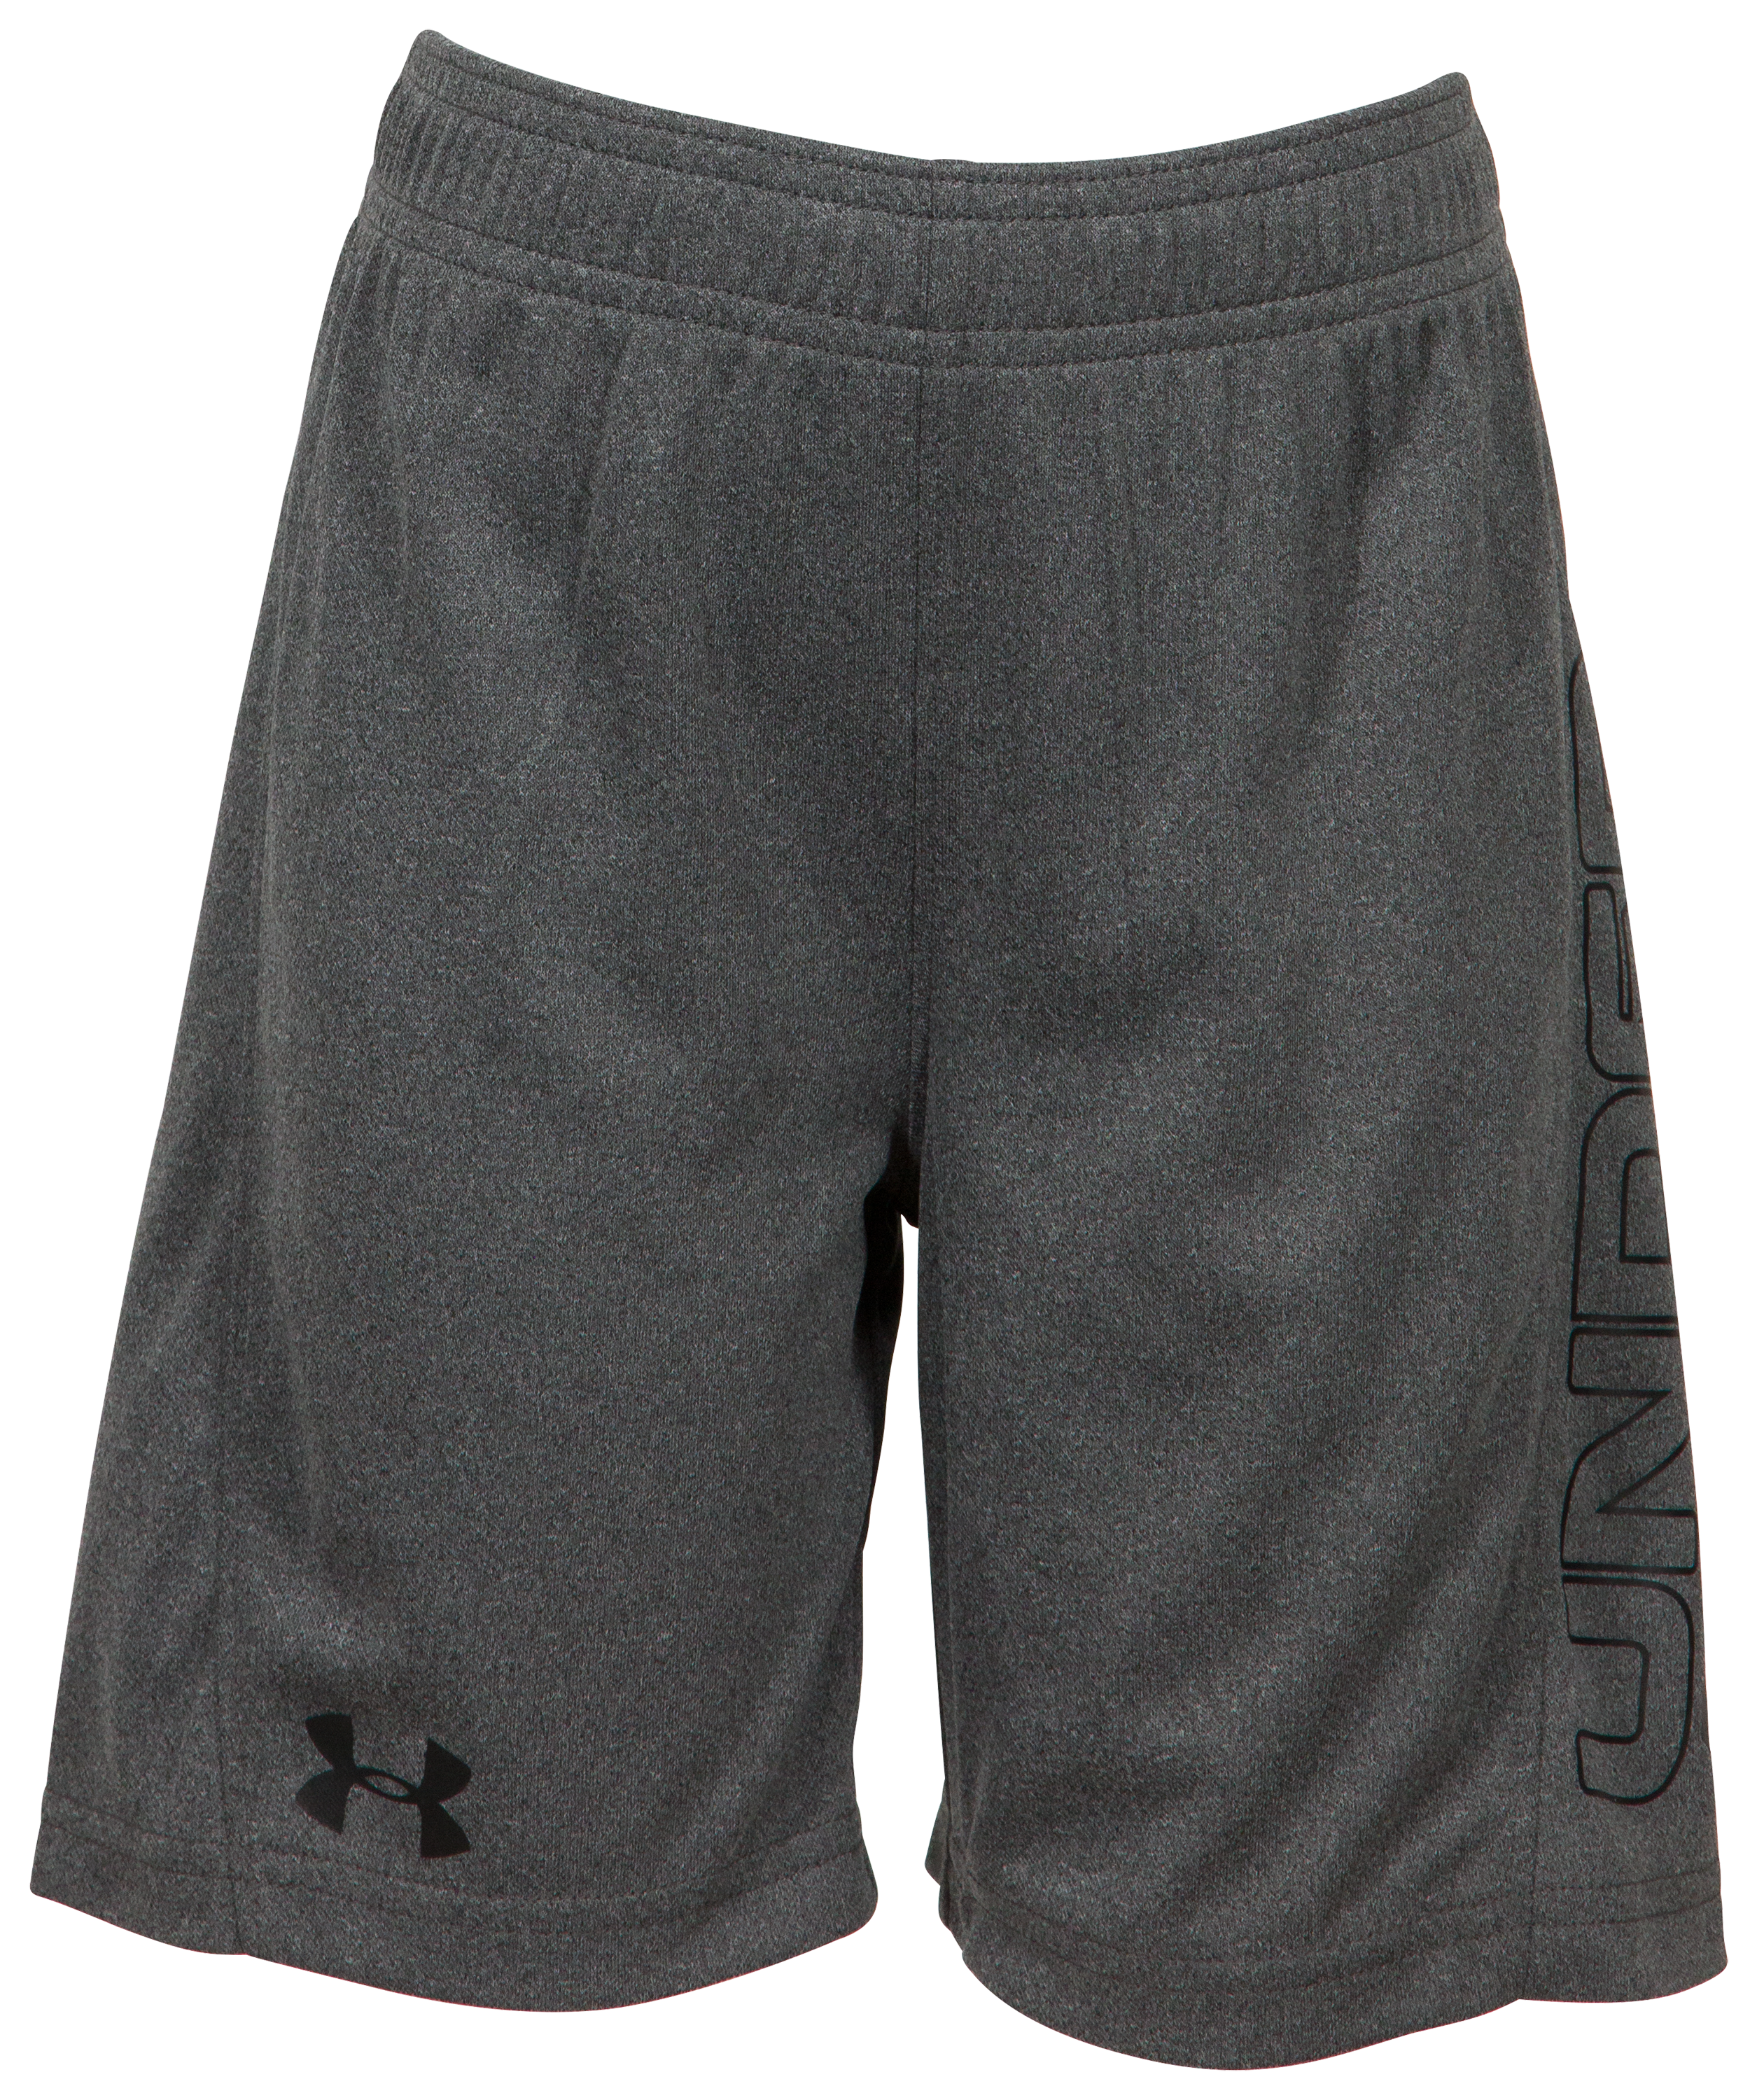 Under Armour Kick Off Shorts for Toddlers or Kids | Bass Pro Shops